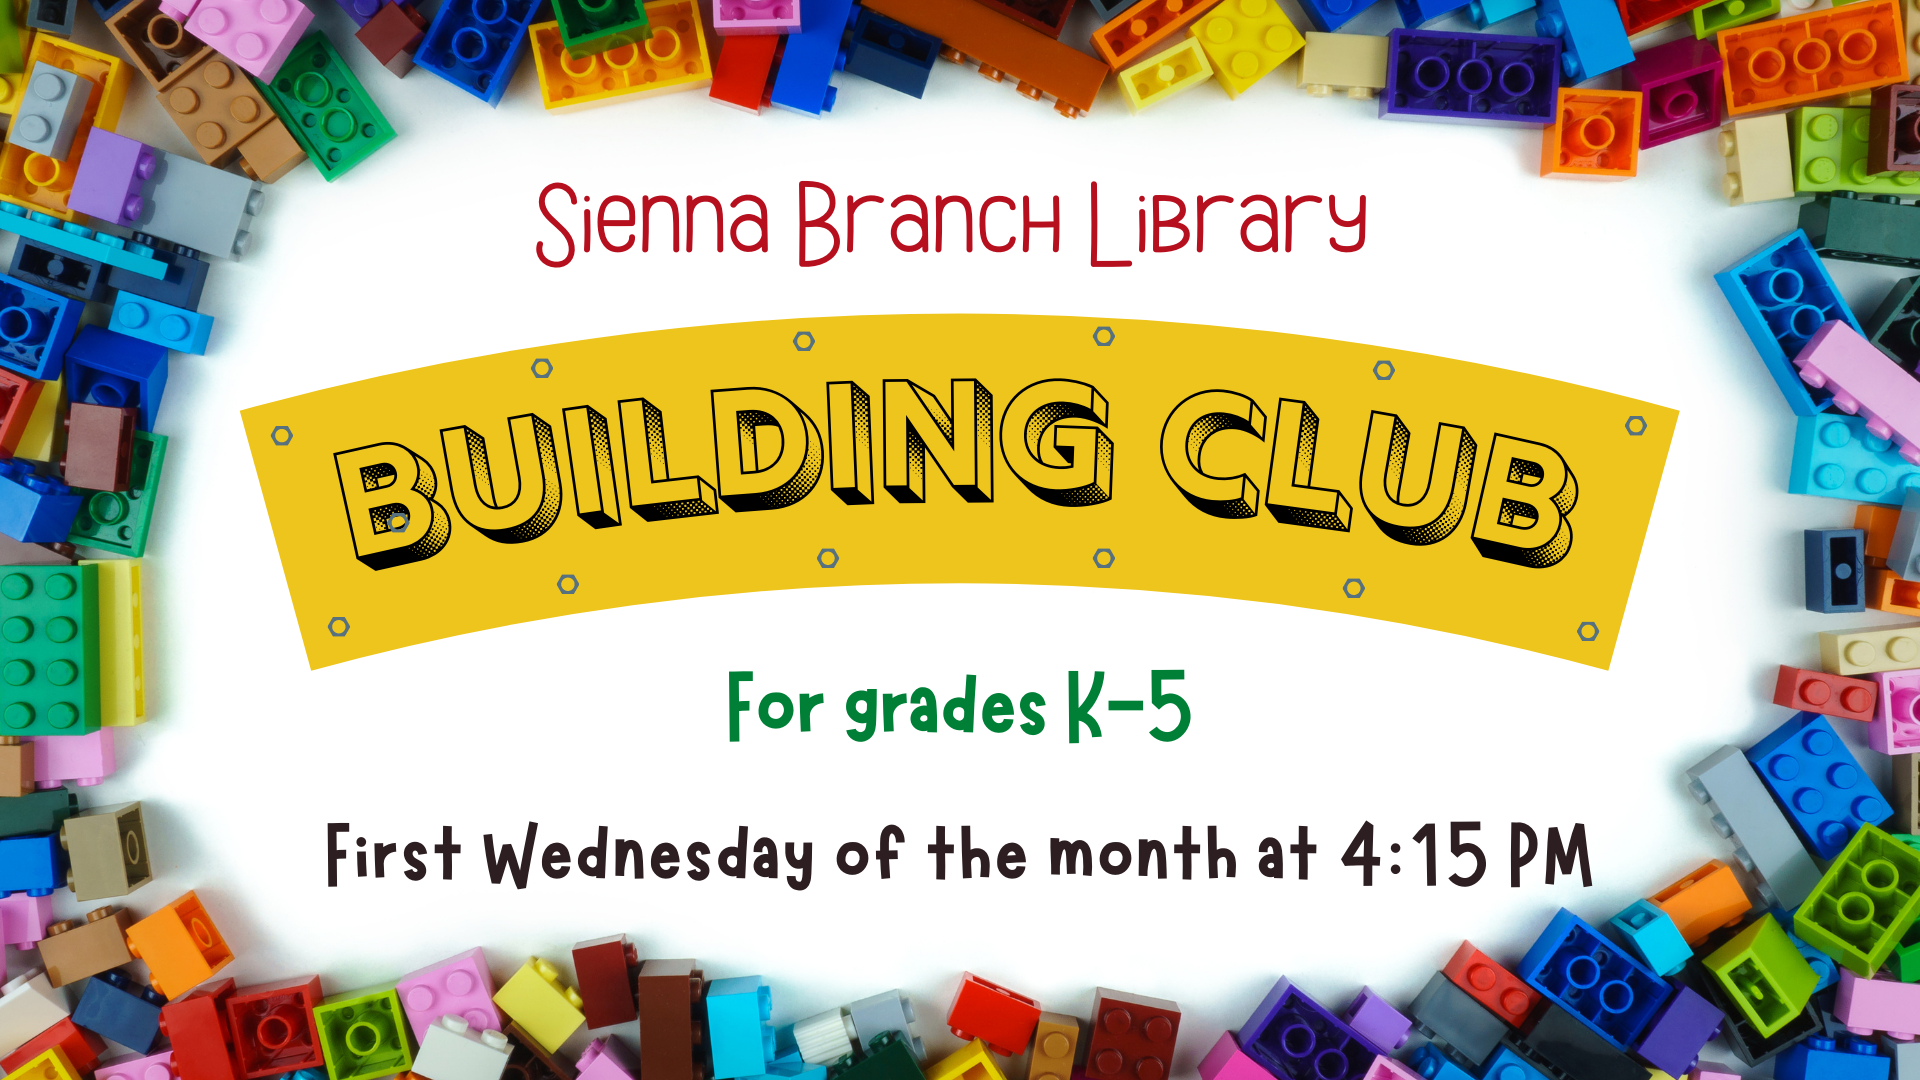 Sienna Branch Building Club First Wednesday of the month at 4:15 PM